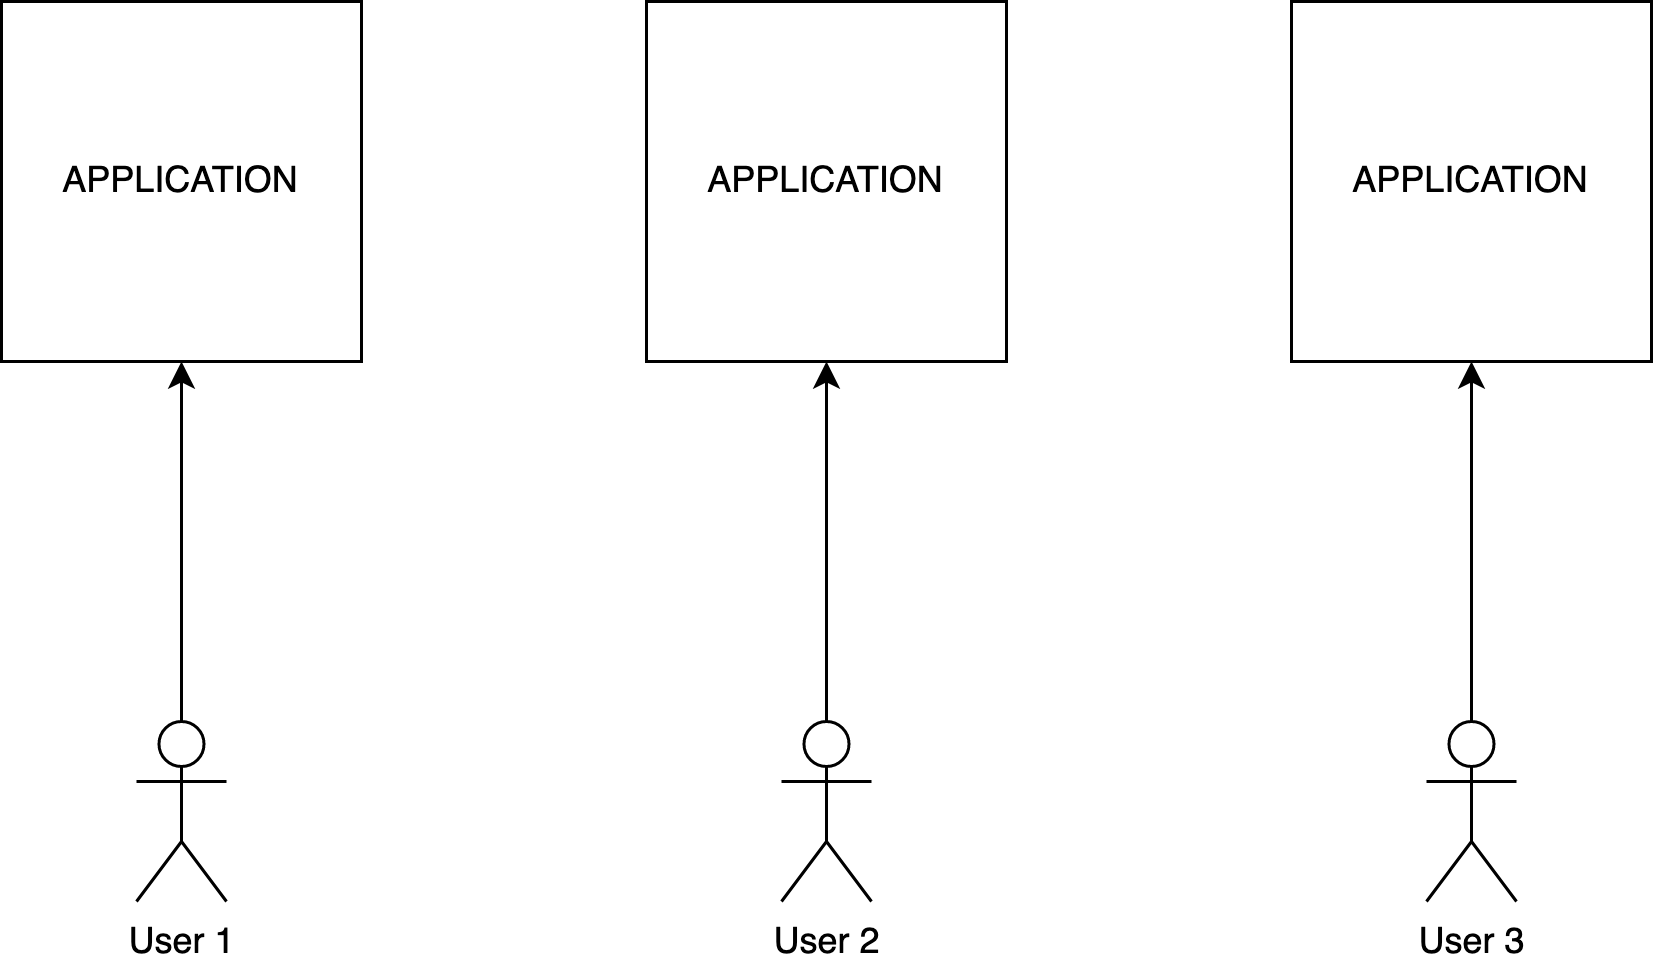 Single-tenant application schema - every user connects to their app instance